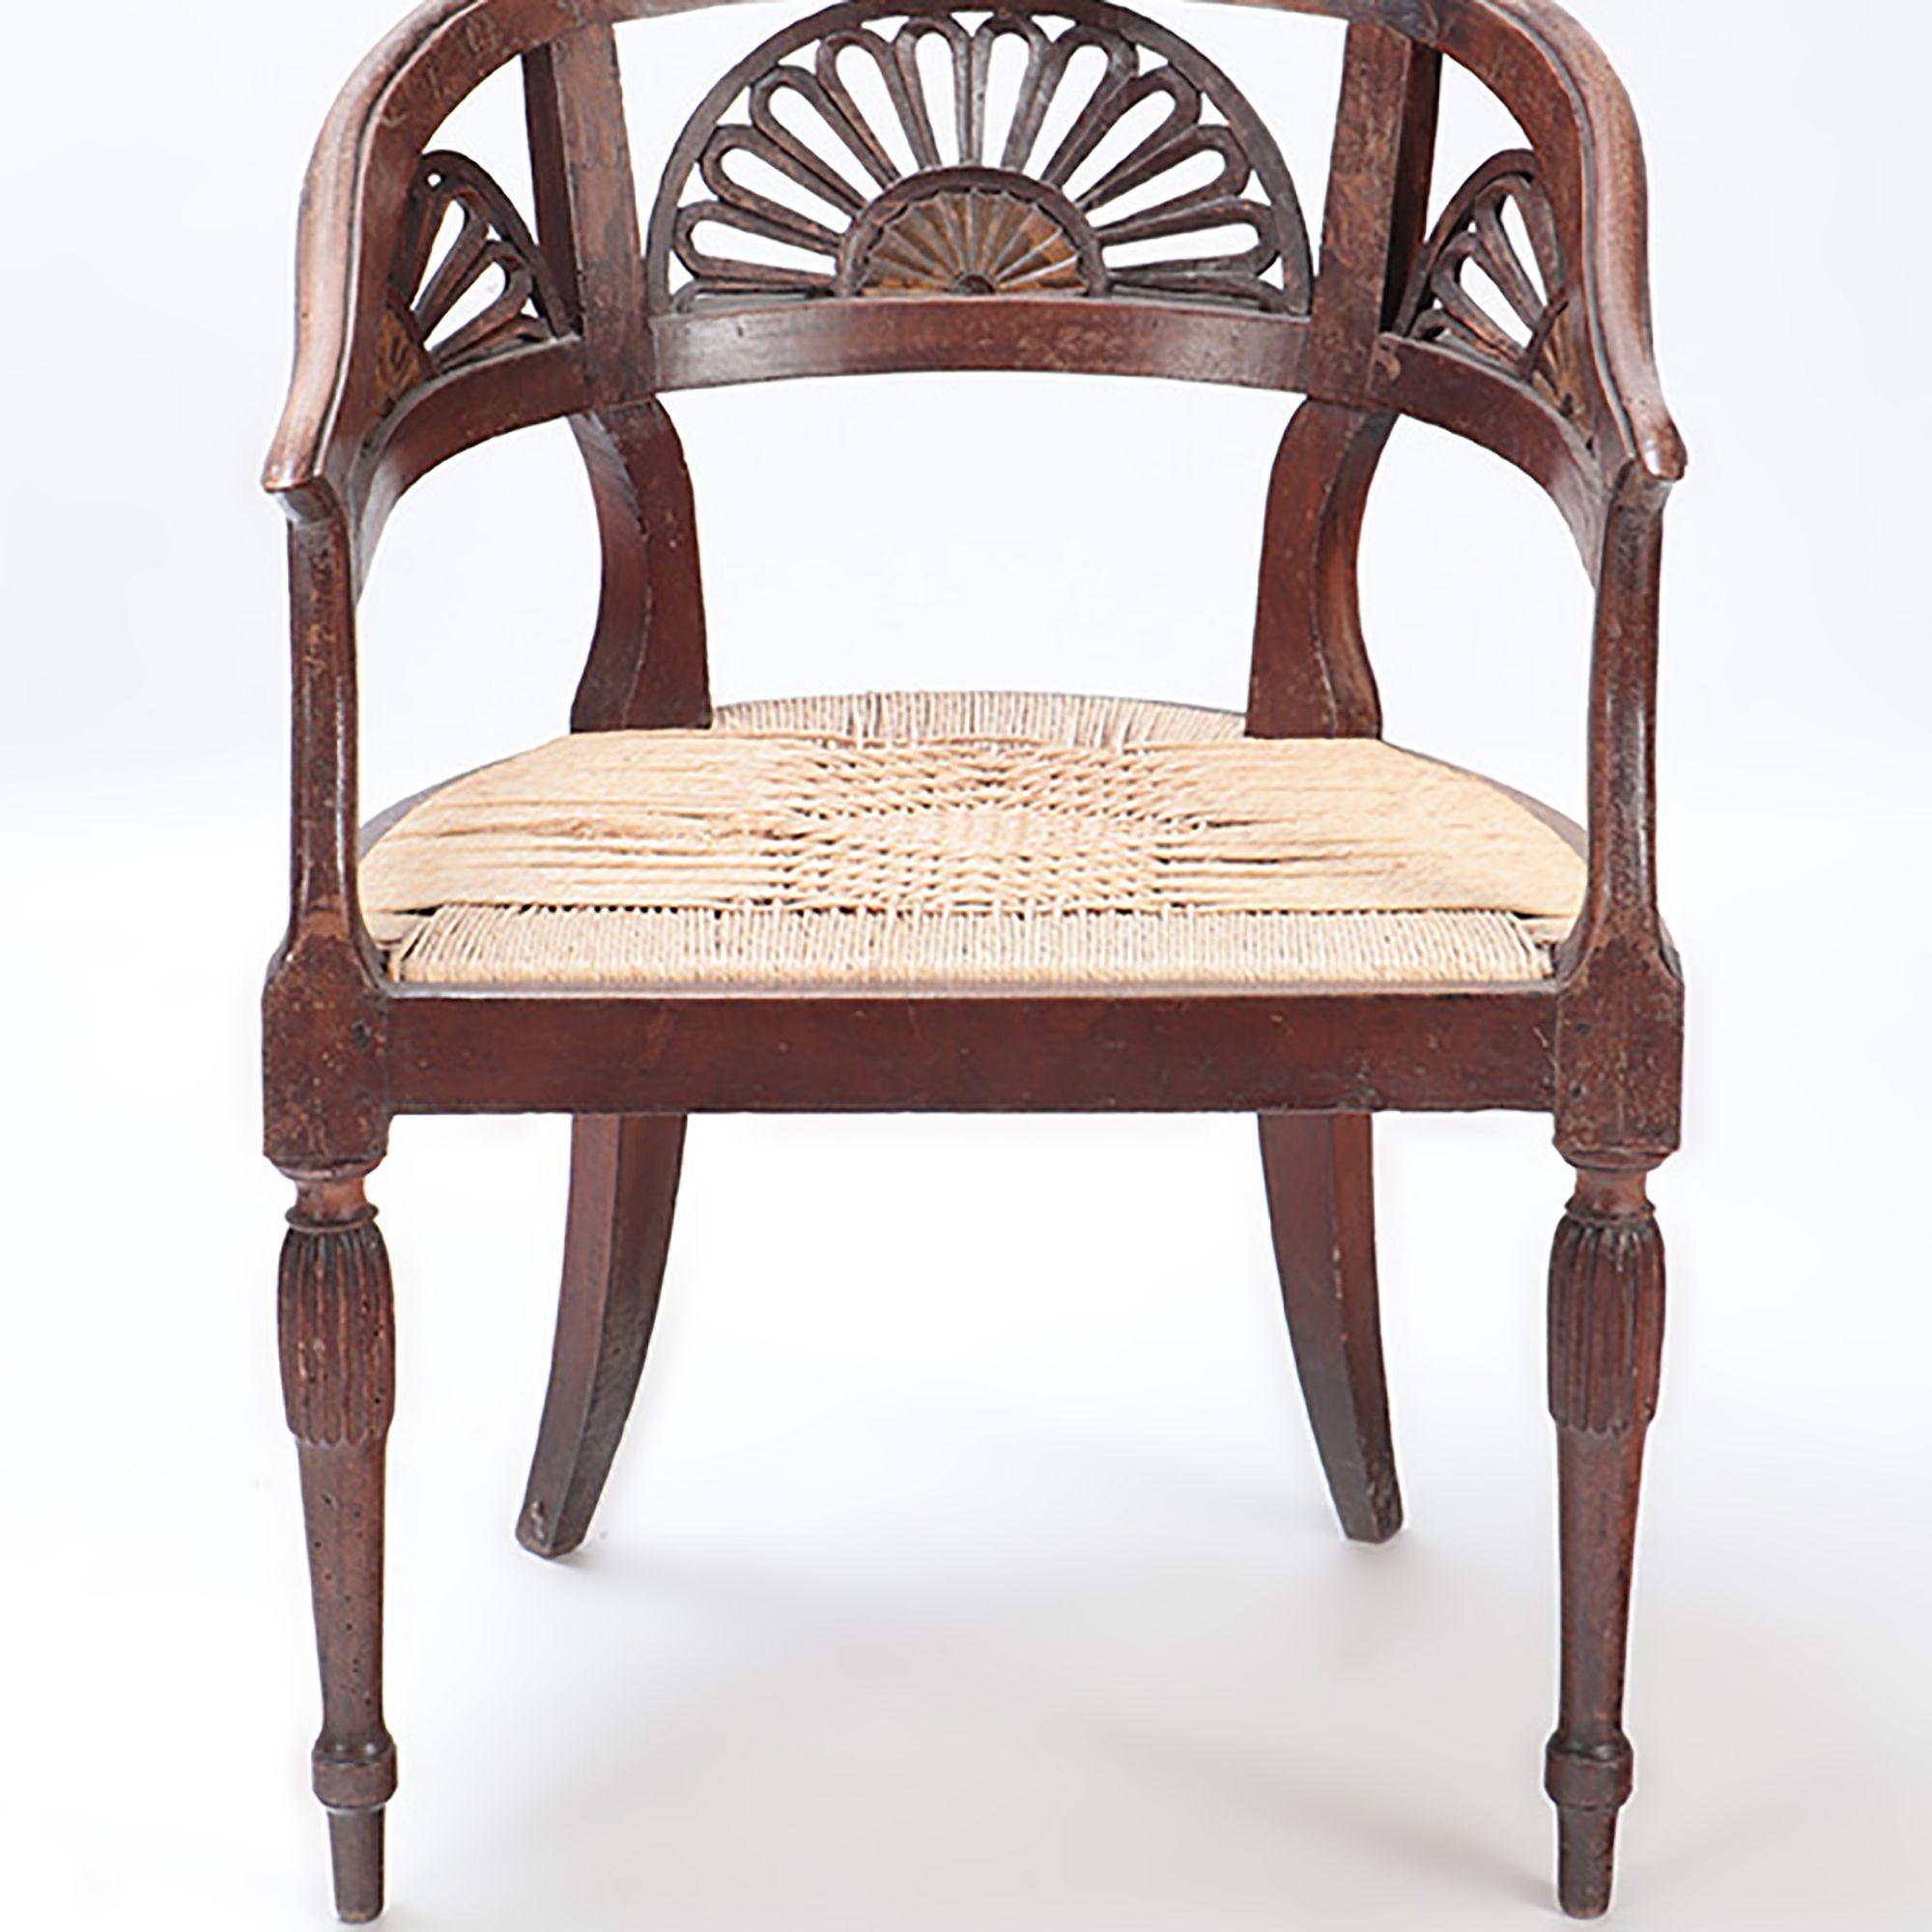 Pair of Italian Walnut Open Arm Chairs with Cord Seats, circa 1800 For Sale 4